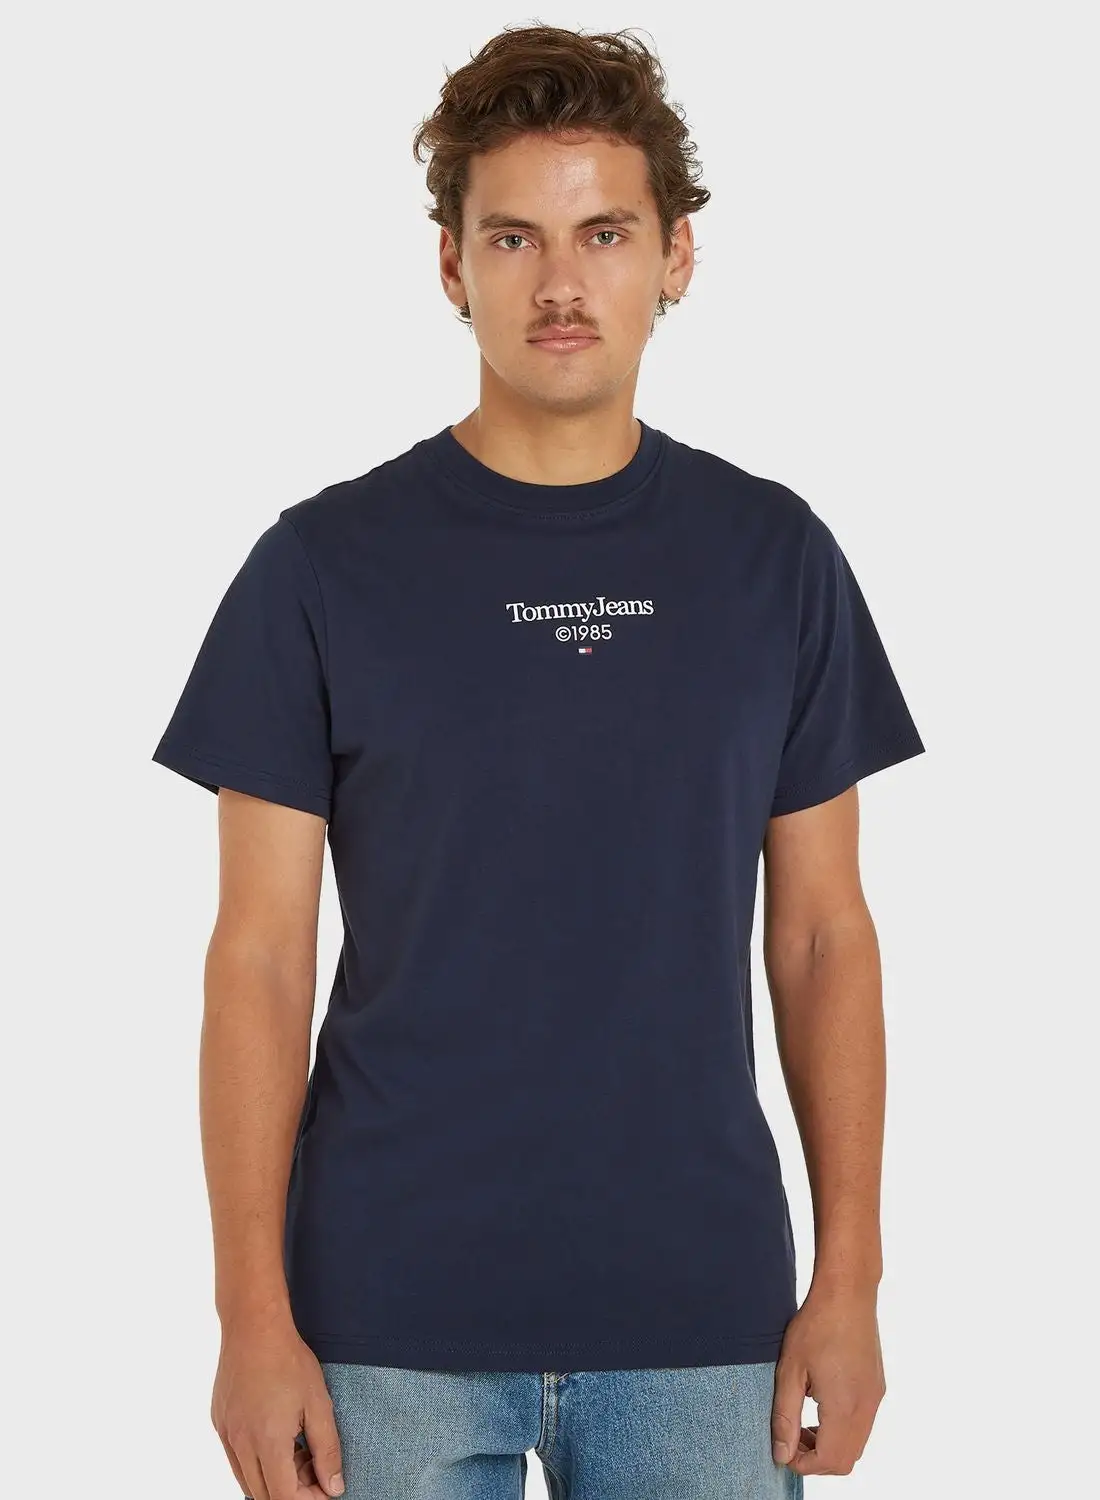 TOMMY JEANS Logo Crew Neck T-Shirt